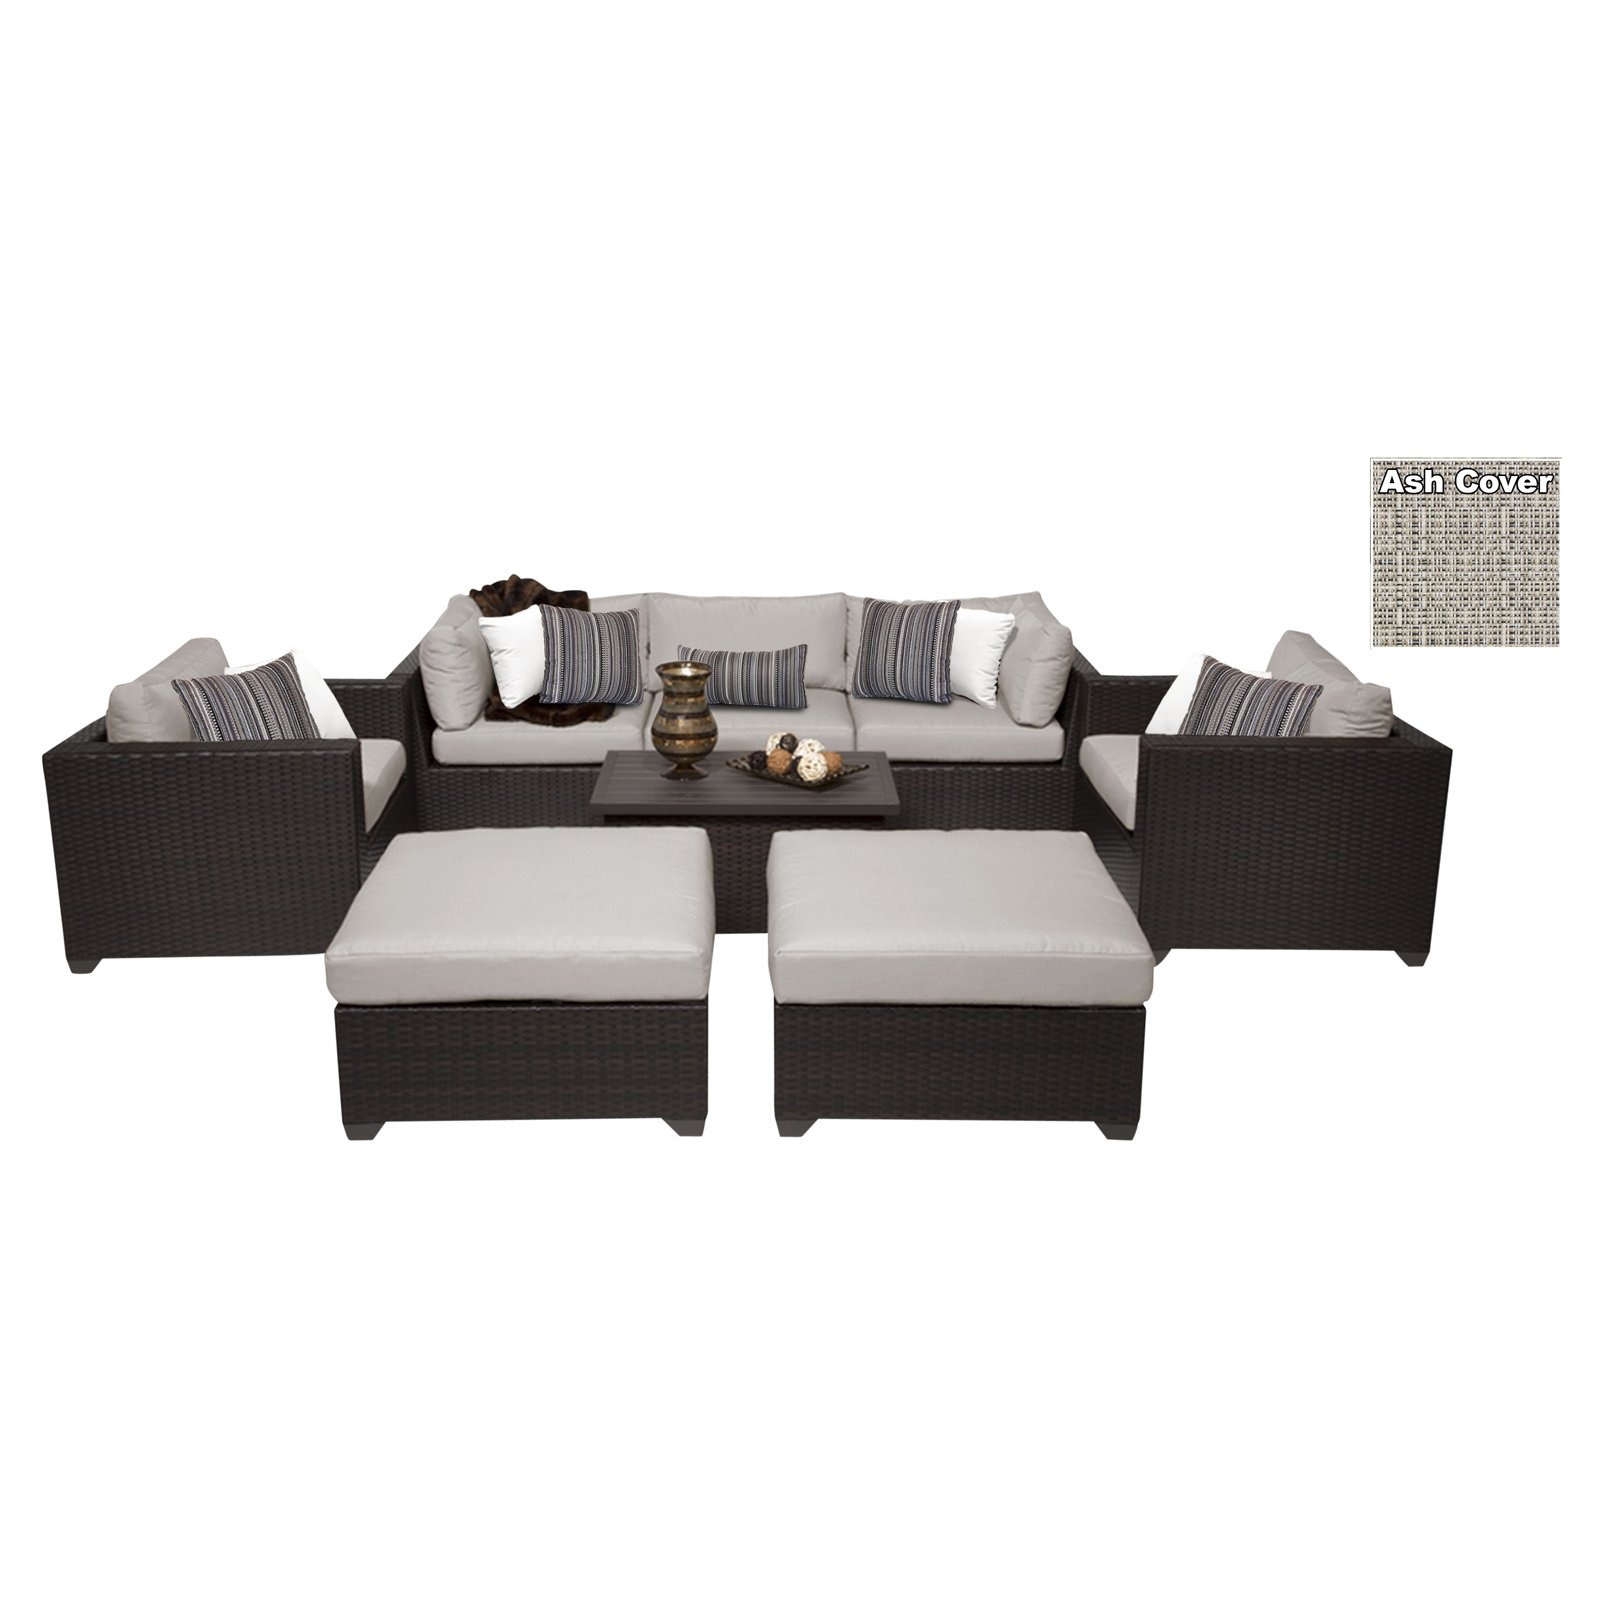 TK Classics Belle Wicker 8 Piece Patio Conversation Set with Ottoman and 2 Sets of Cushion Covers - image 1 of 2